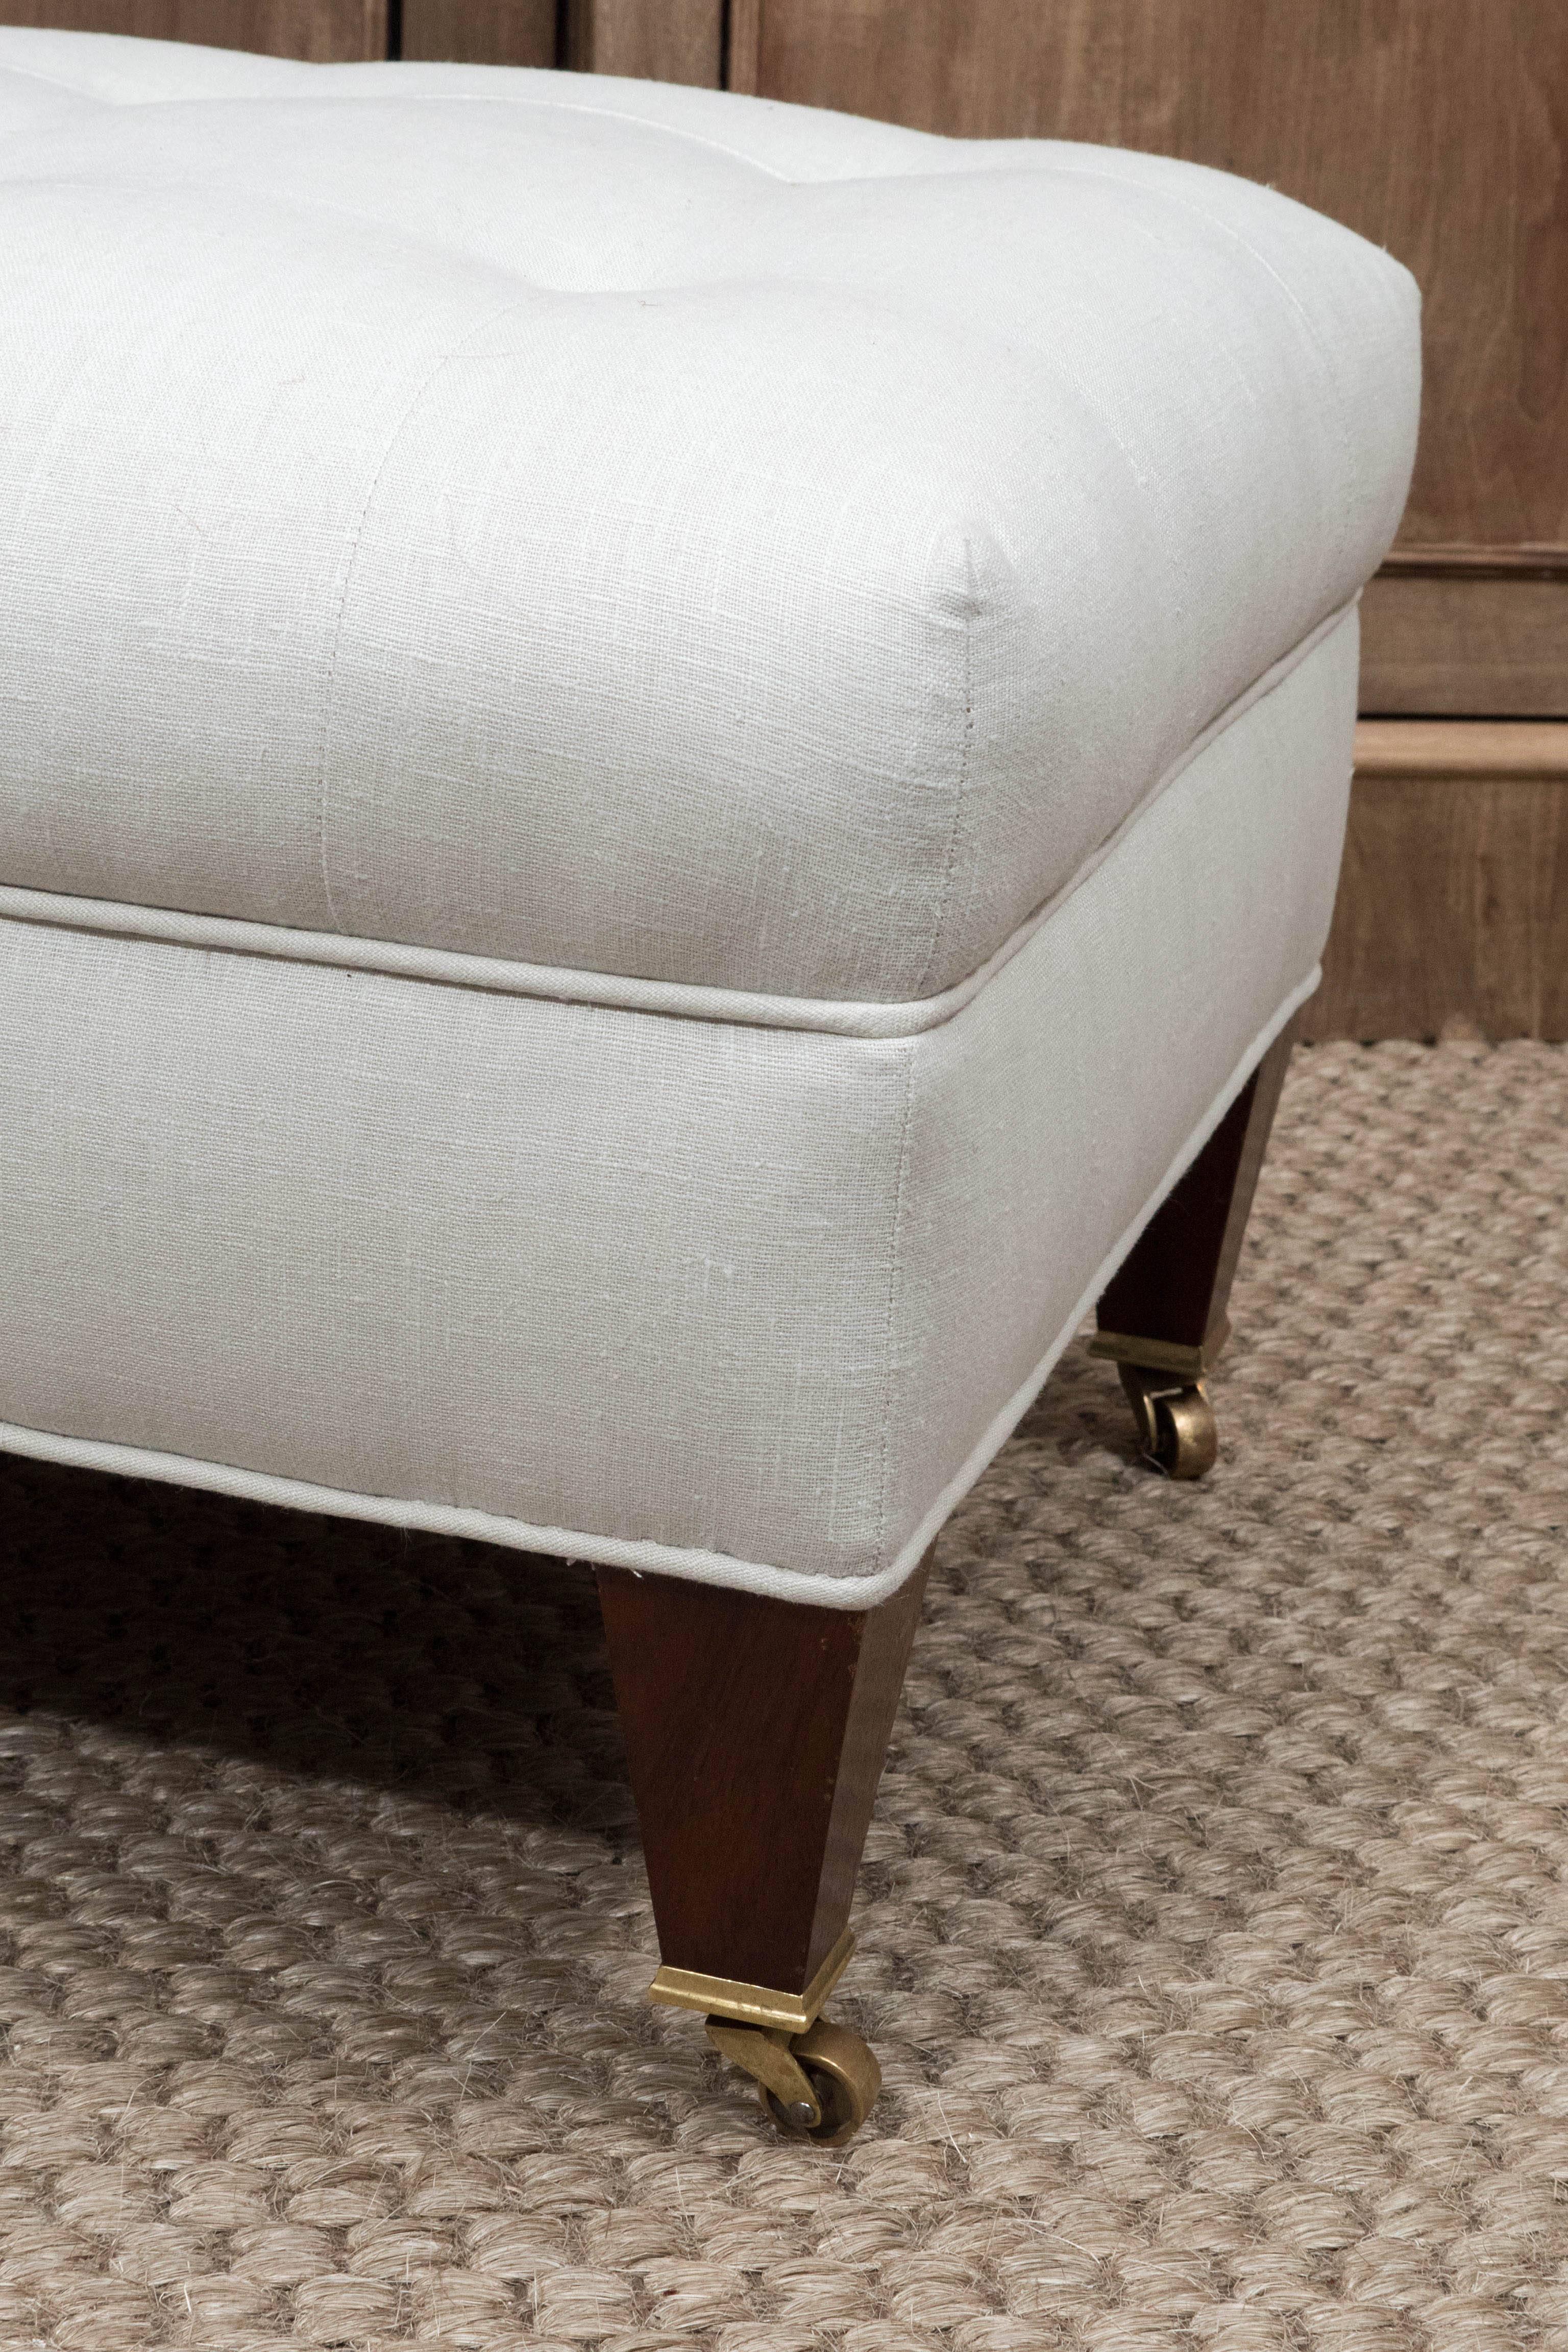 A sleek, tailored ottoman with button tufting on tapered legs with casters. The clean lines and size of this piece make it very versatile it can be used in a bedroom, office, tv room or living room. It has been newly re-upholstered in a soft gray